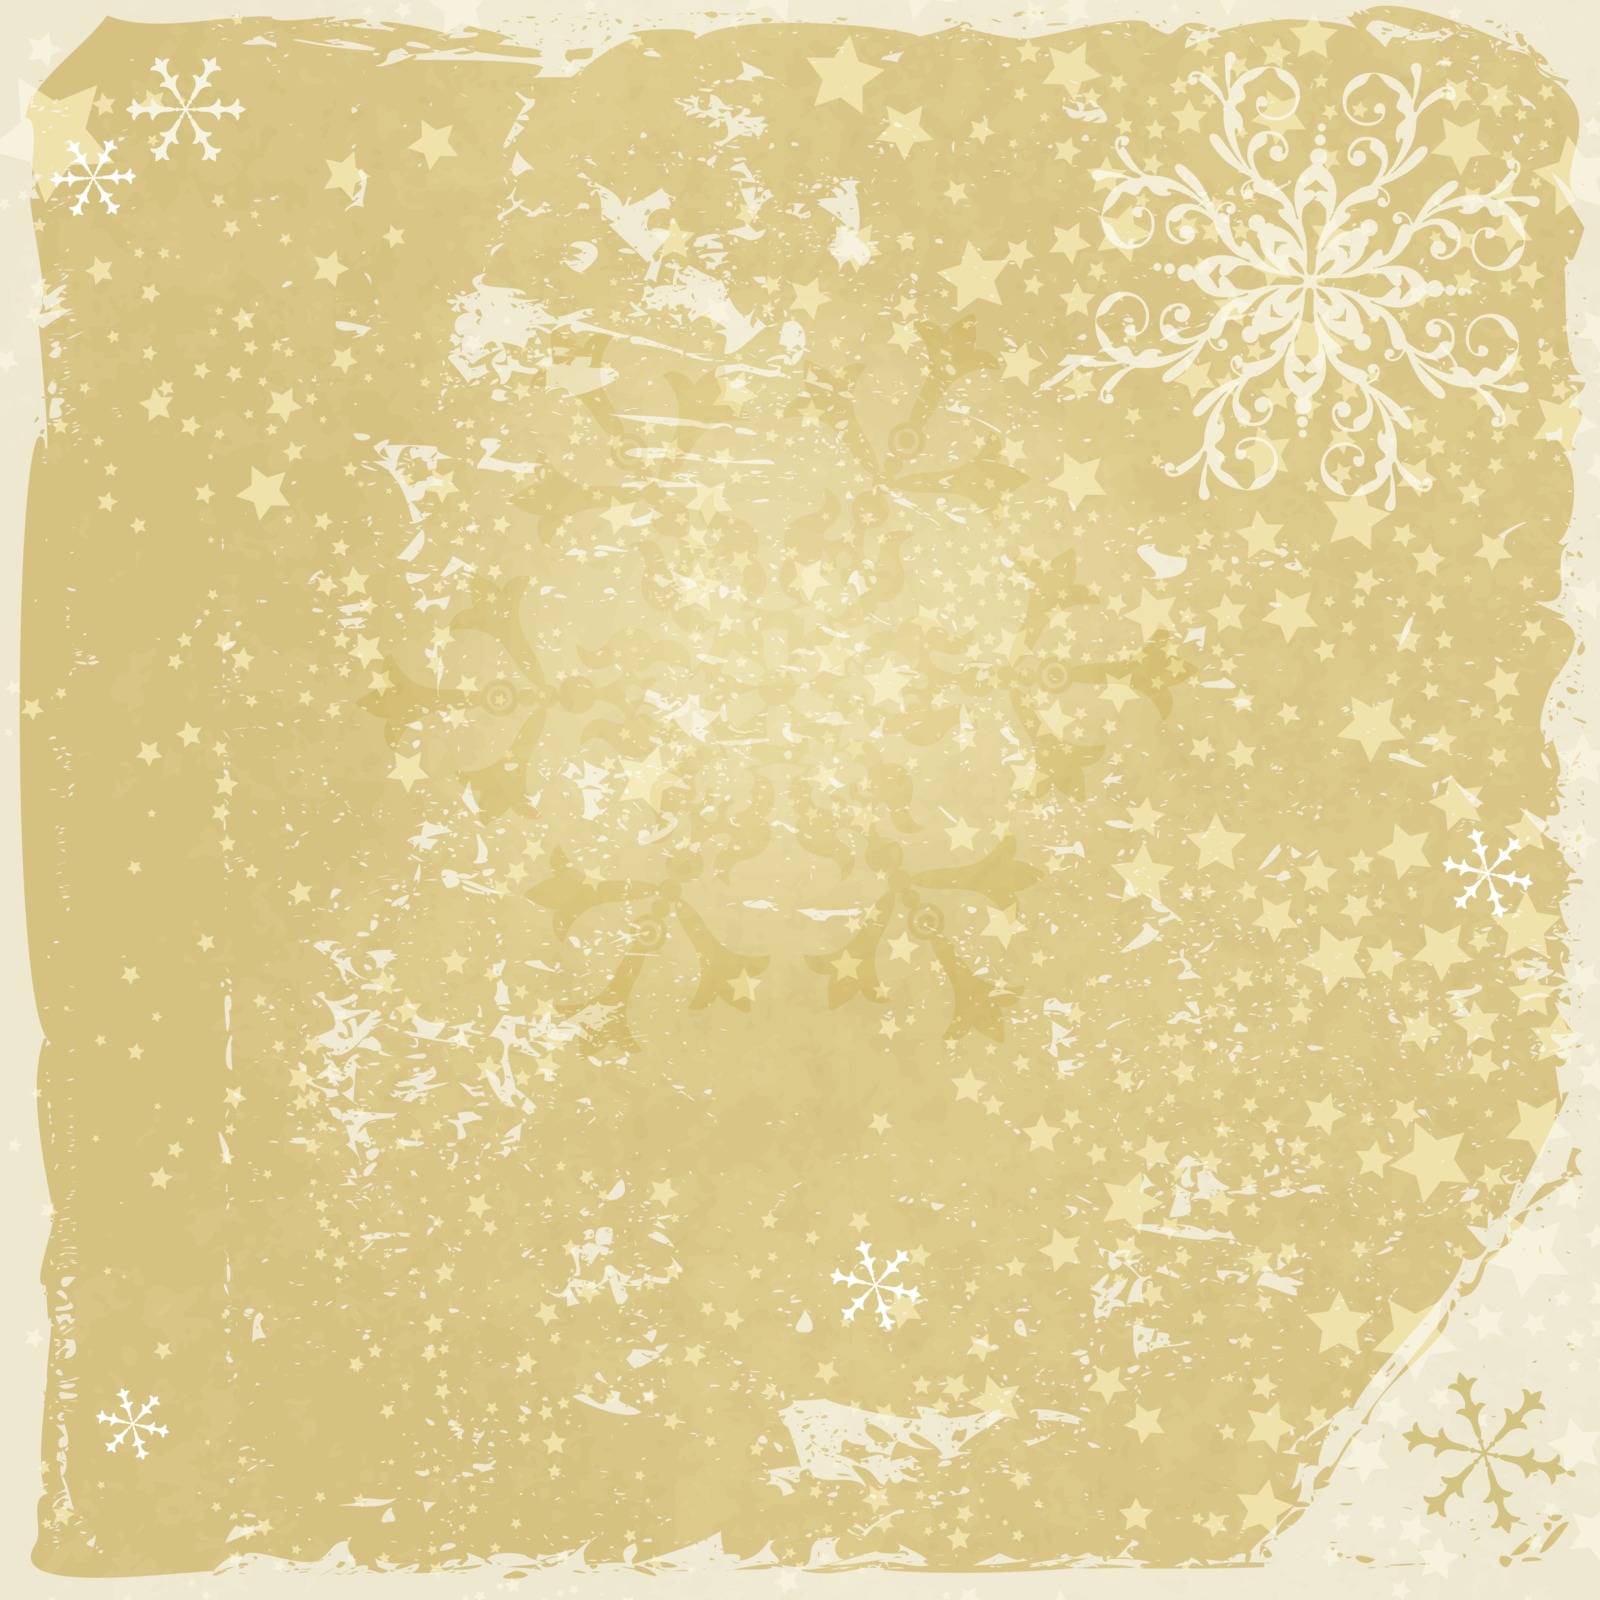 Grungy christmas frame with snowflakes  by OlgaDrozd